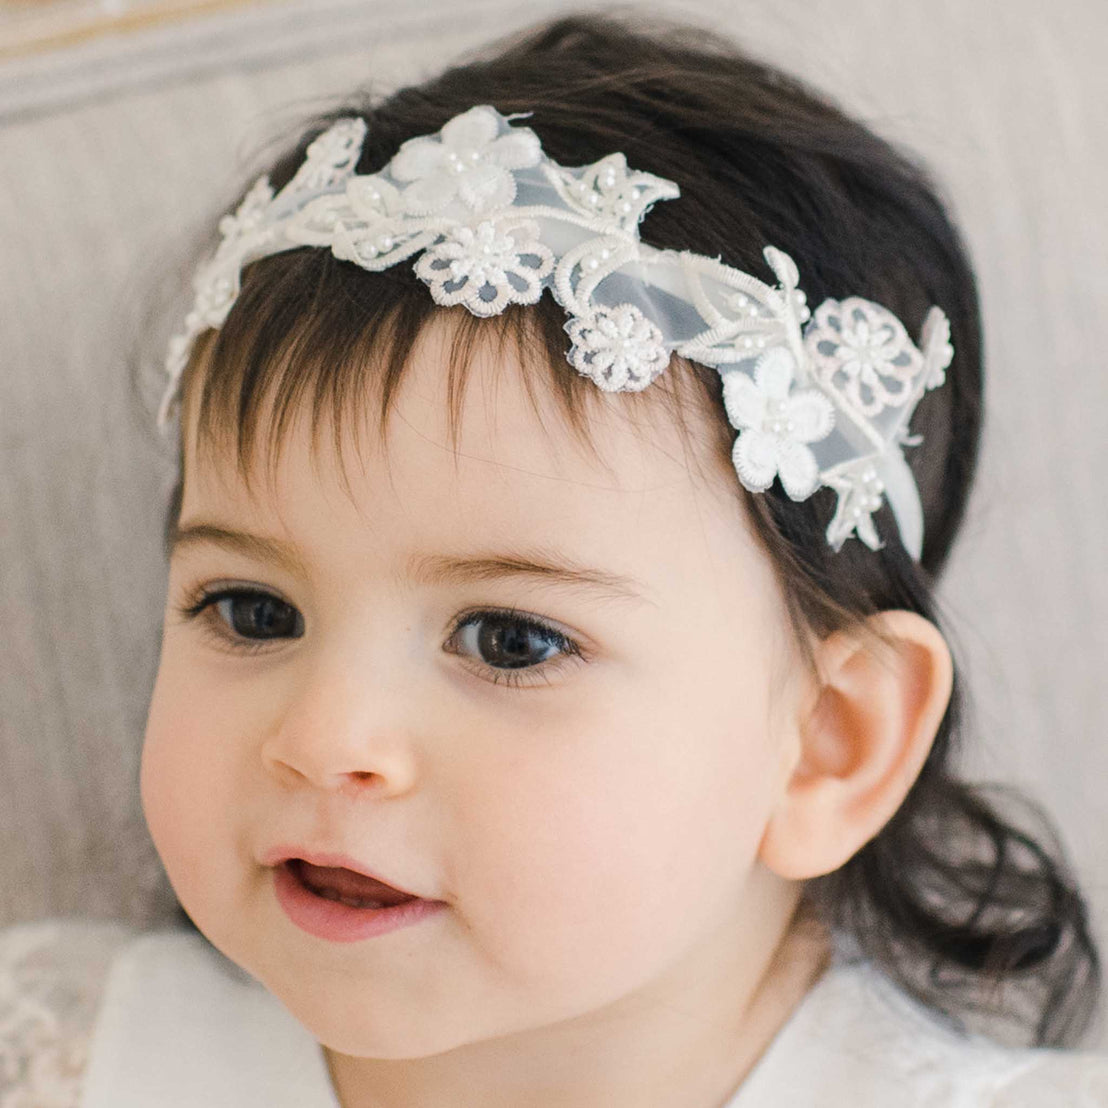 Close-up of a toddler with dark hair wearing the Jessica Beaded Flower Headband, a delicate white floral headband, showing a joyful expression.